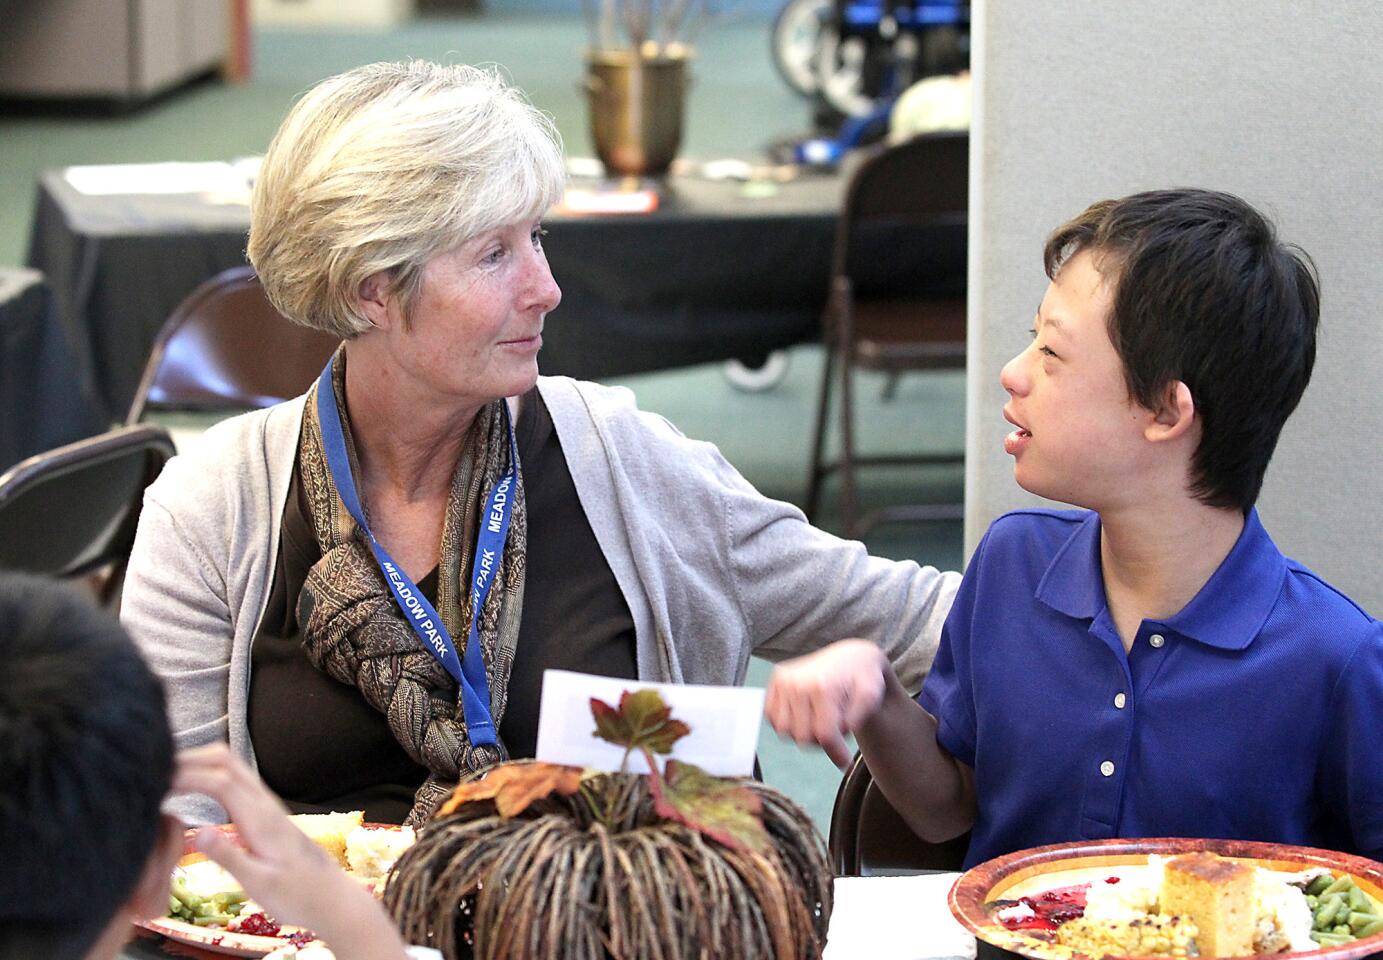 Speech therapist Julie Meves, left, chats with Danny Warschauer during the Meadow Park Elementary School's Thanksgiving meal event.